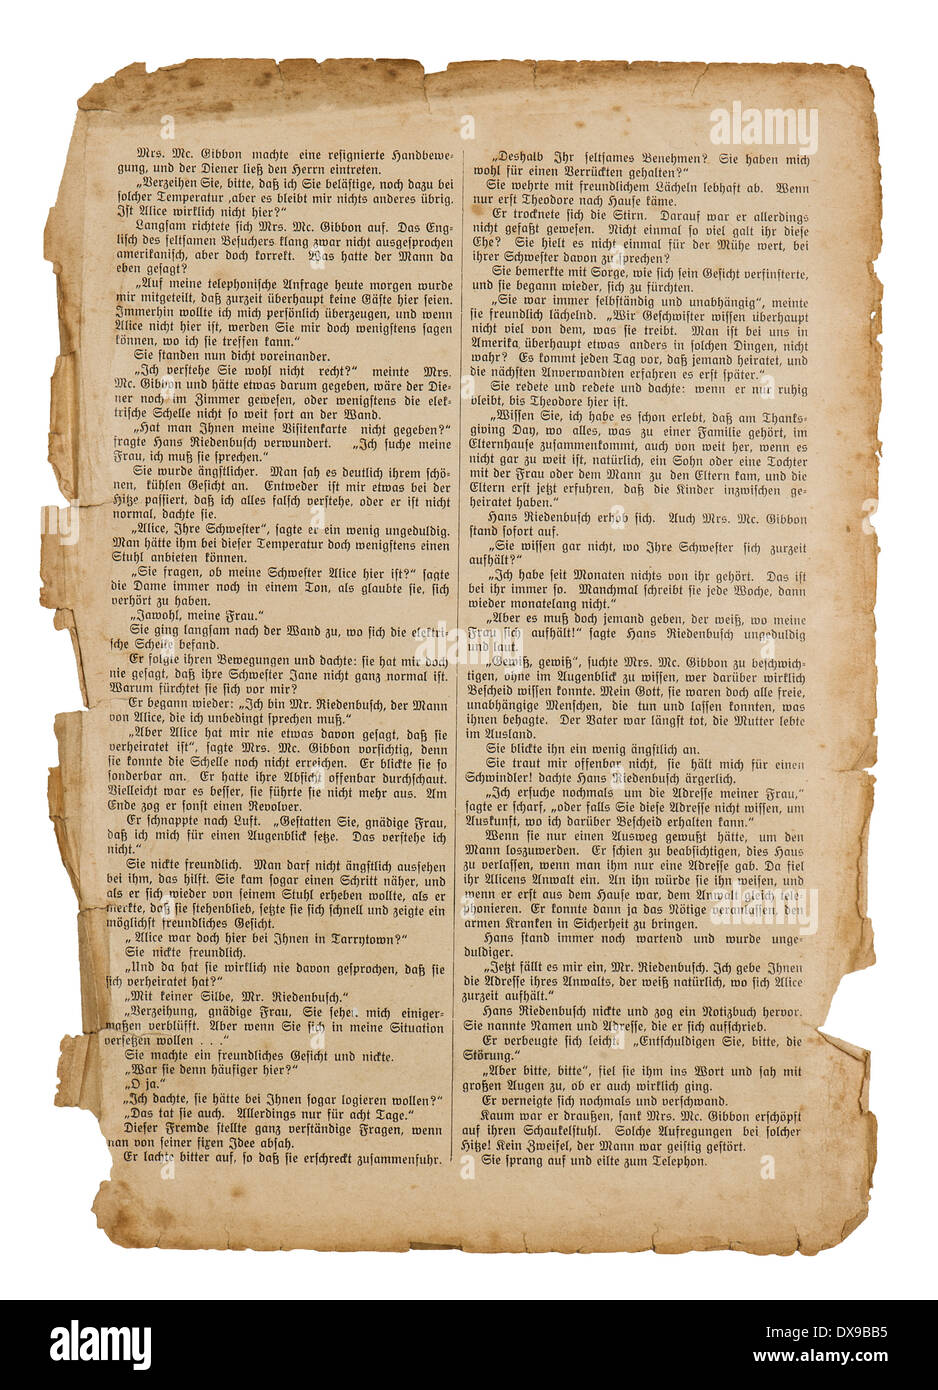 https://c8.alamy.com/comp/DX9BB5/antique-book-page-isolated-on-white-background-old-paper-sheet-DX9BB5.jpg